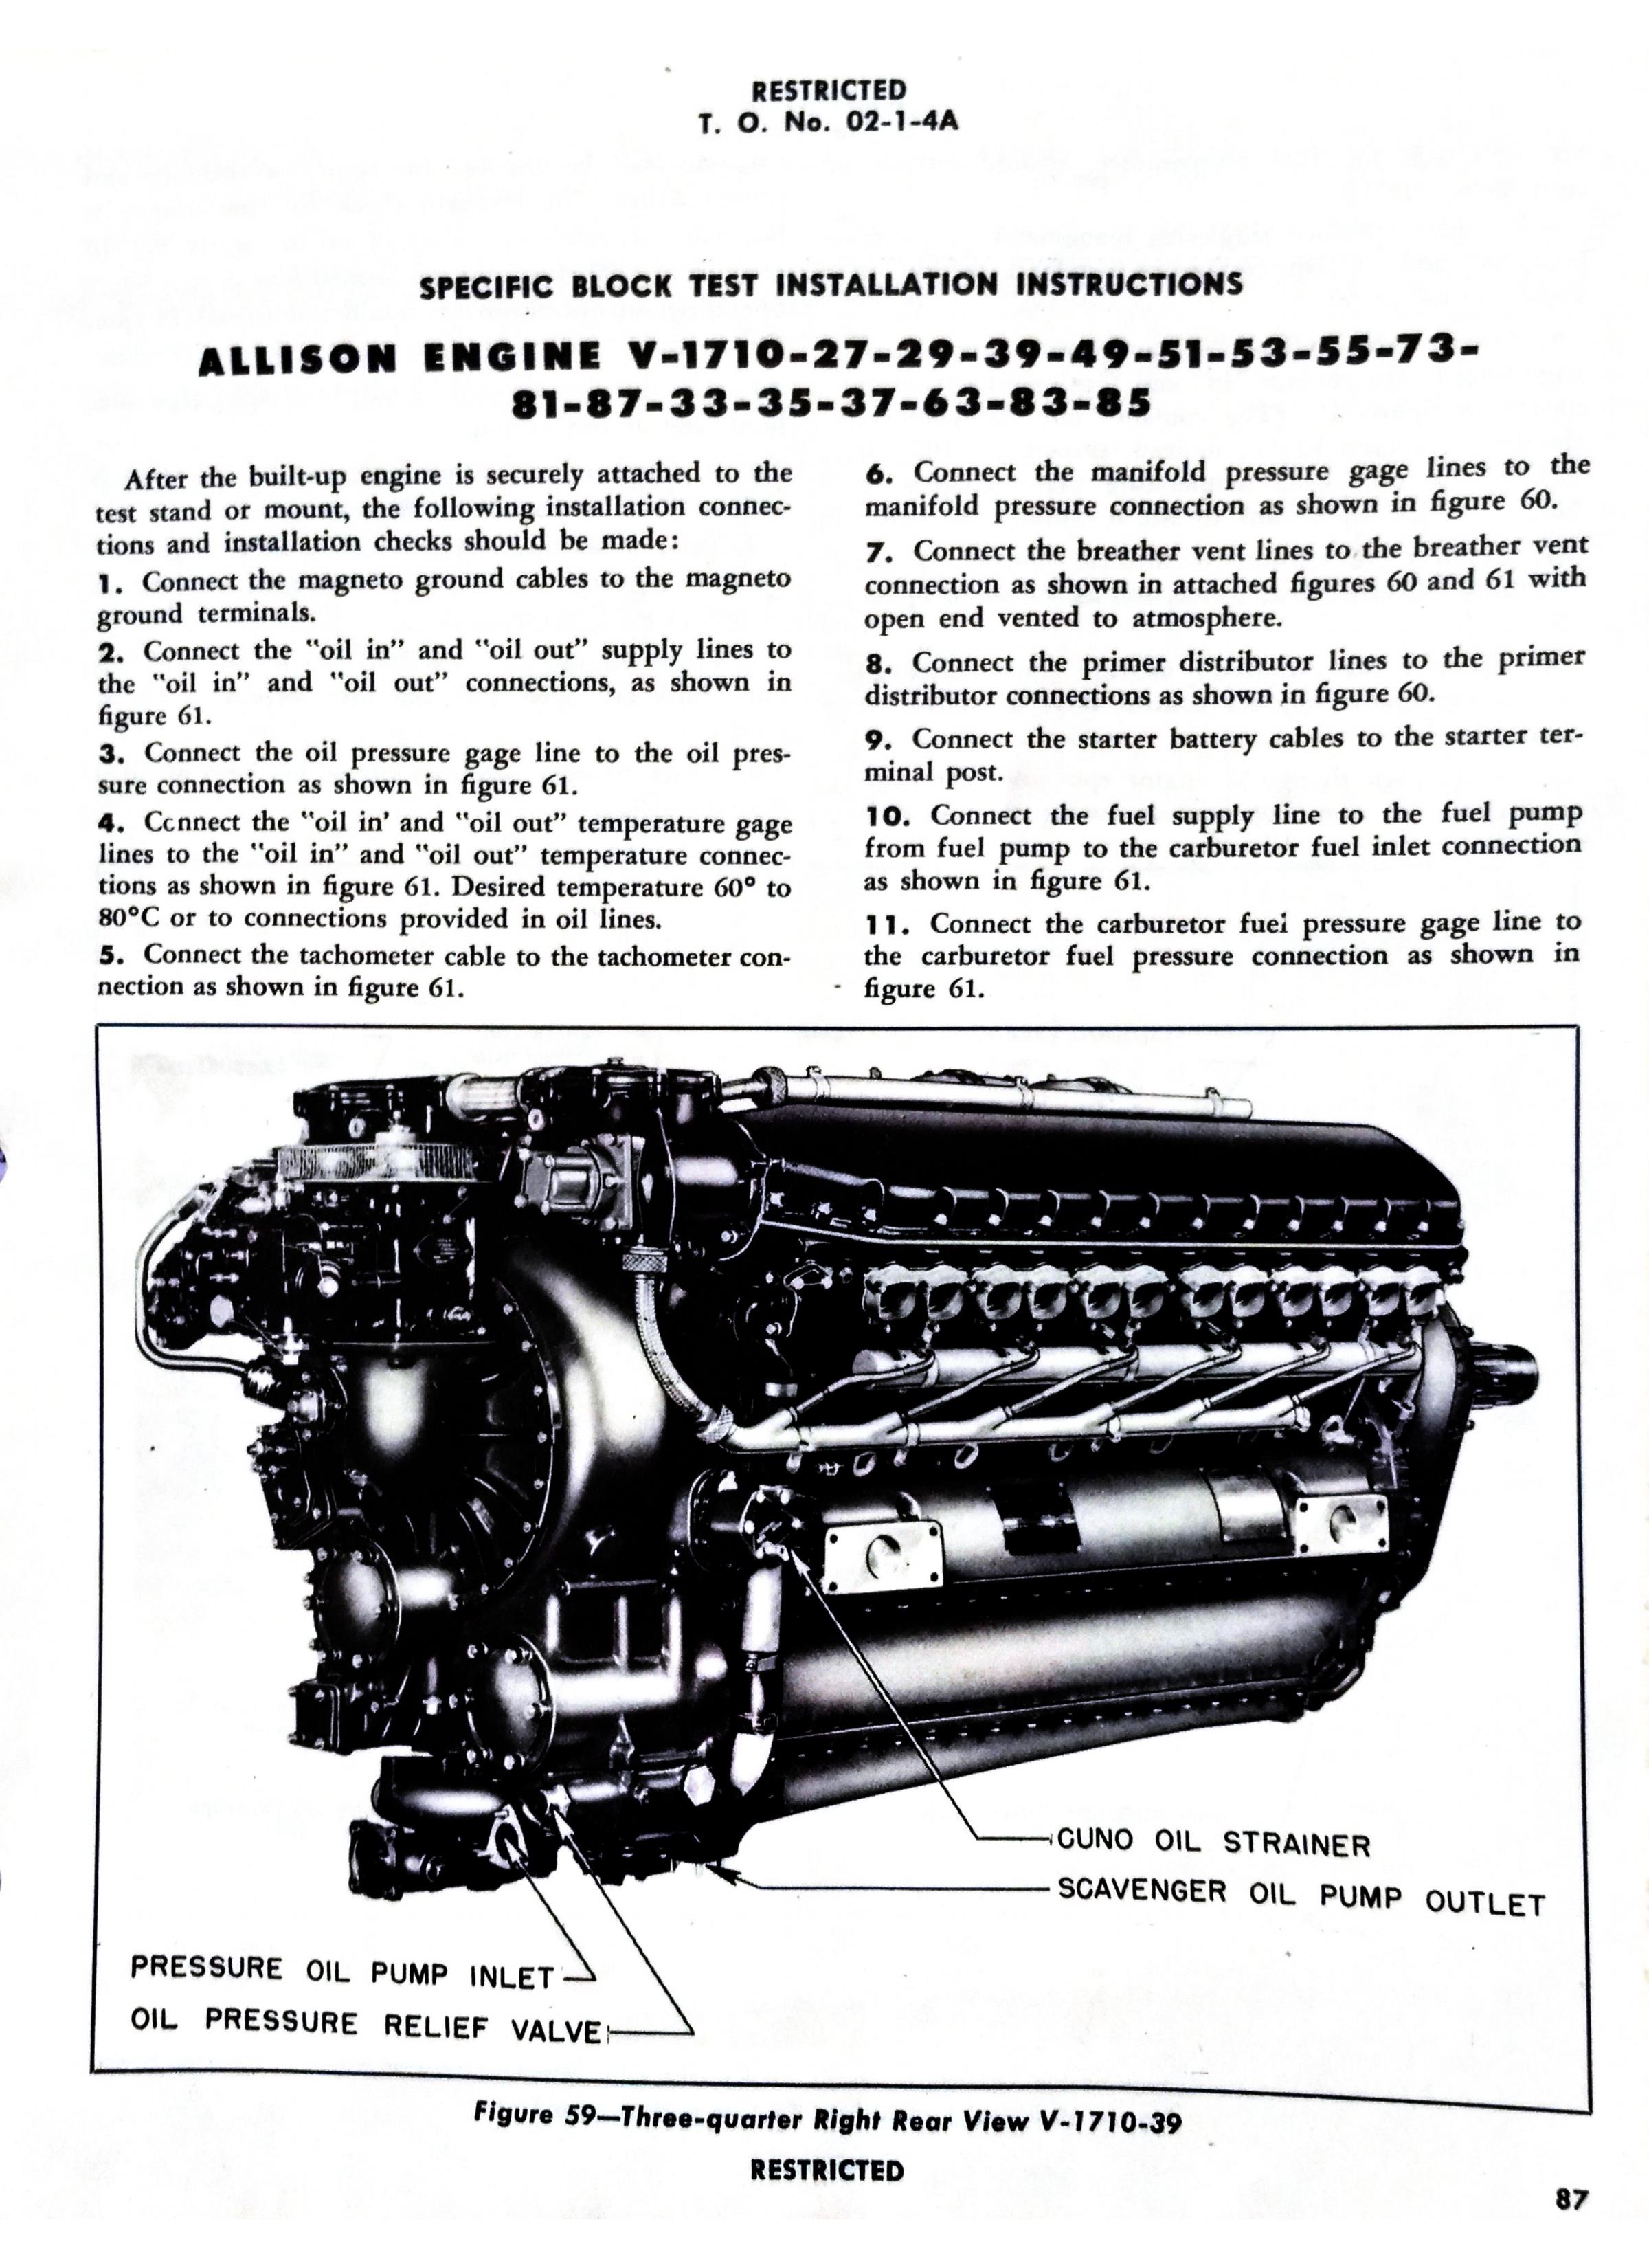 Sample page 1 from AirCorps Library document: Block Test Instructions for V-1710 Allison Engines